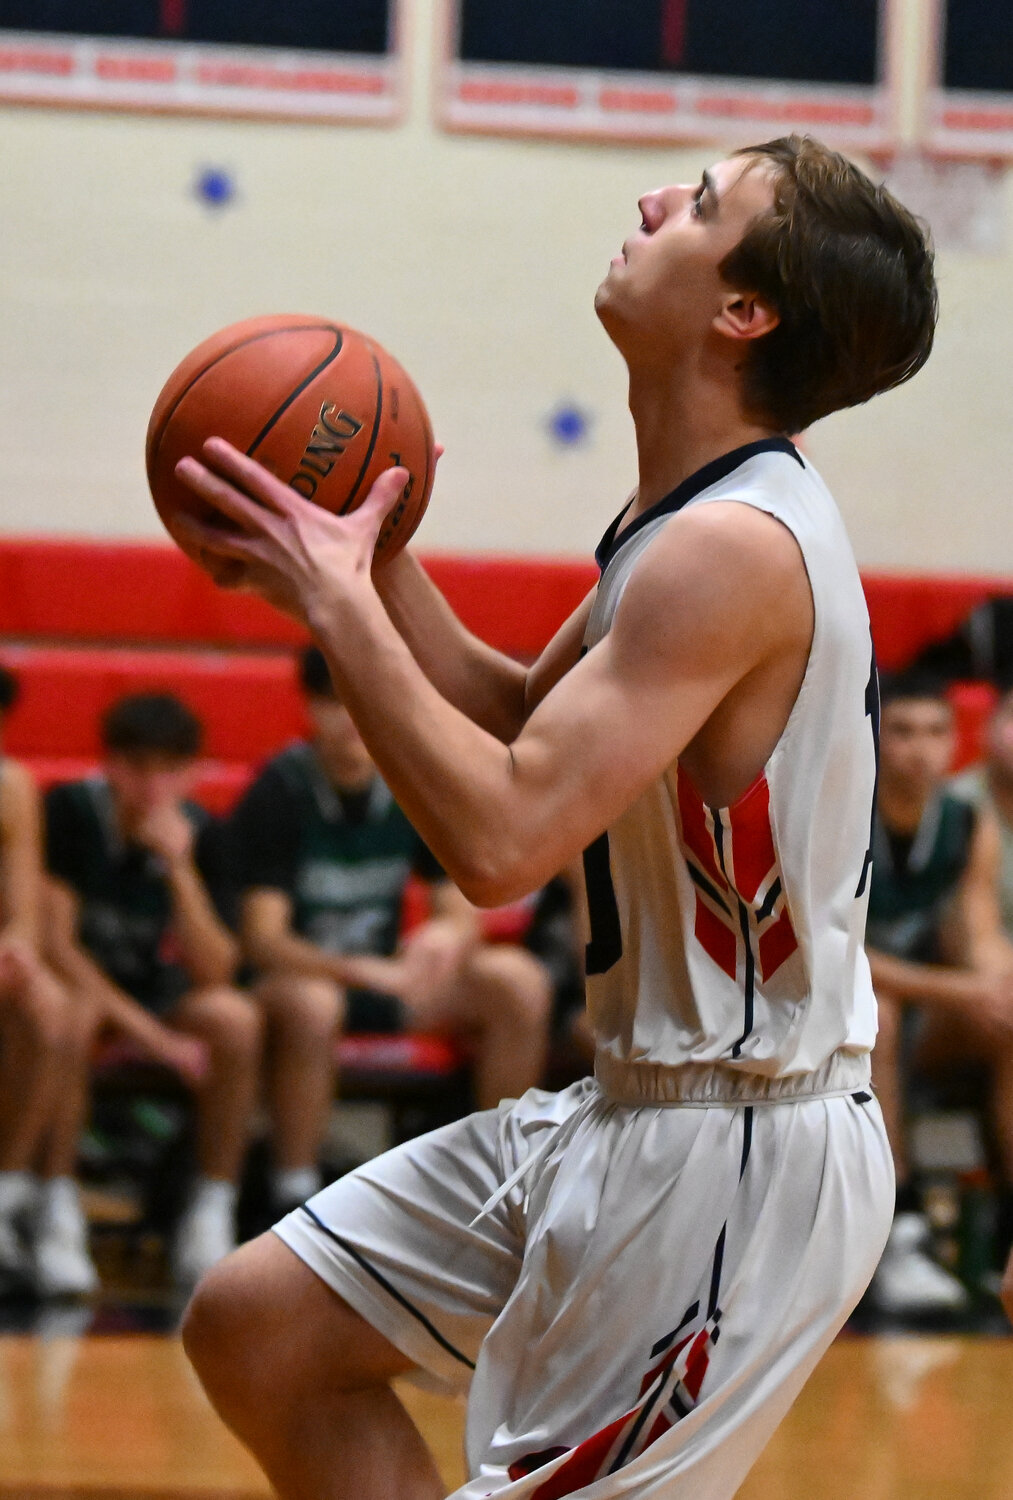 Matthew DeSena had 8 points last Saturday but South Side suffered its first conference defeat after 11 straight wins, falling 67-58 to Manhasset.